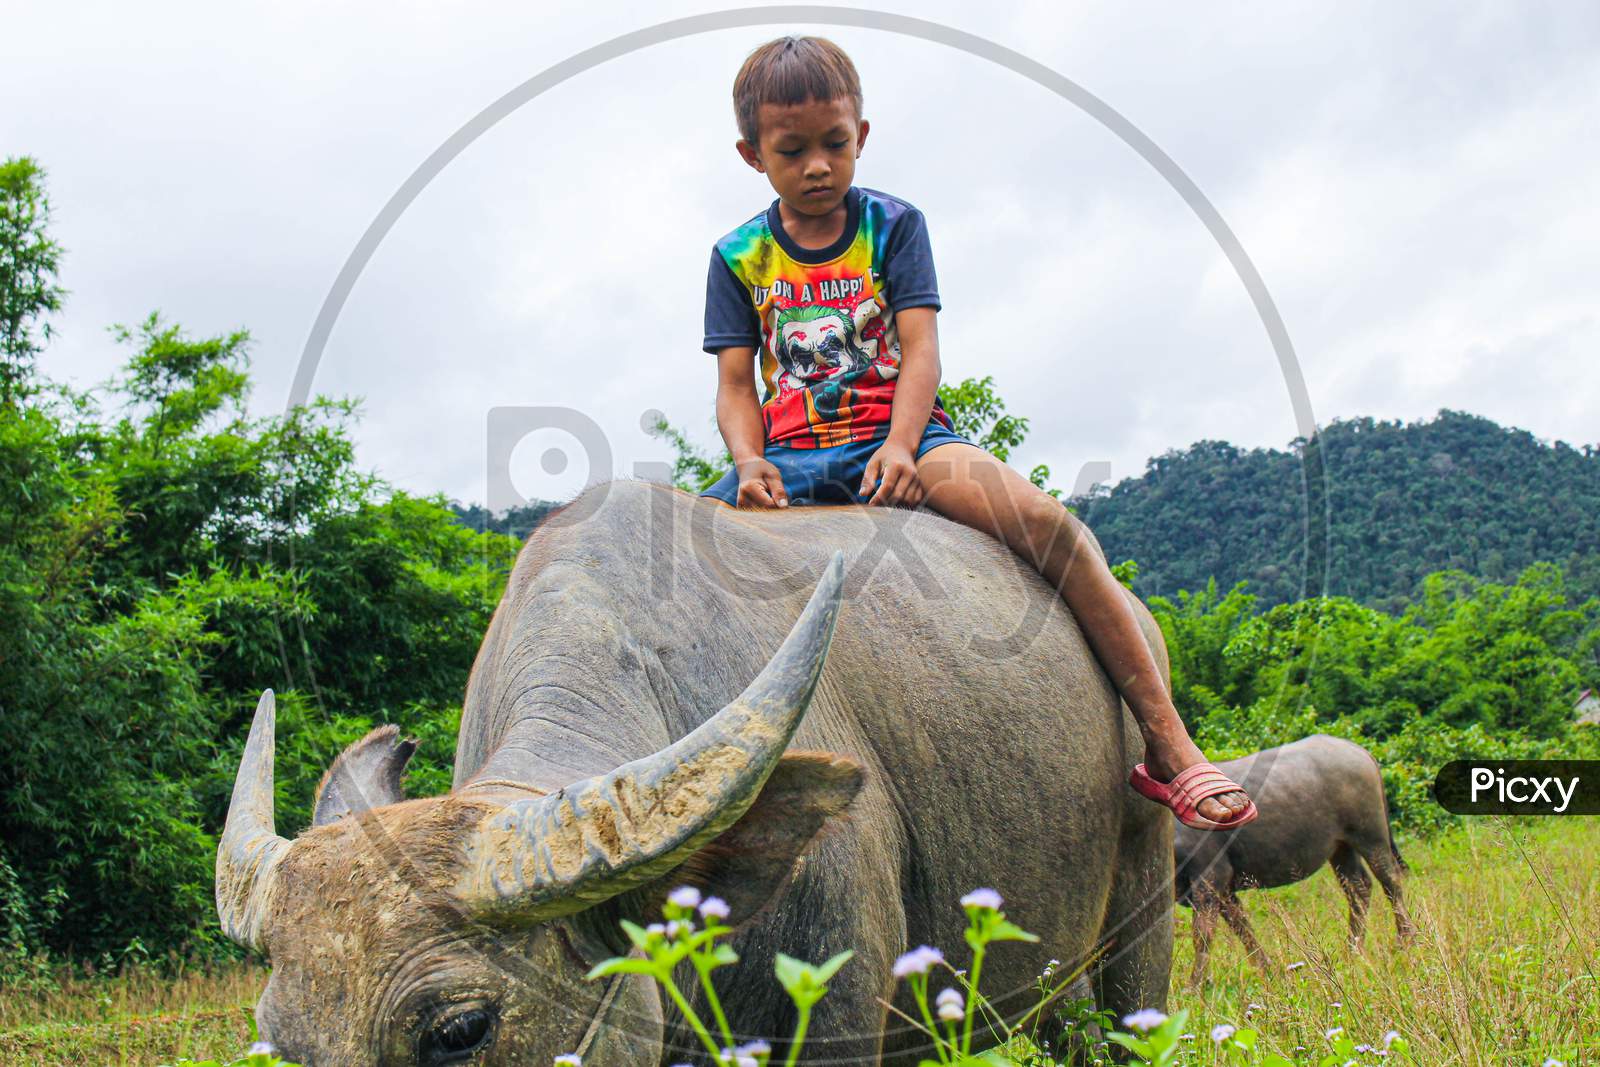 The boy rode on the back of a buffalo in the rice field. It was the happiness of the children in the countryside.